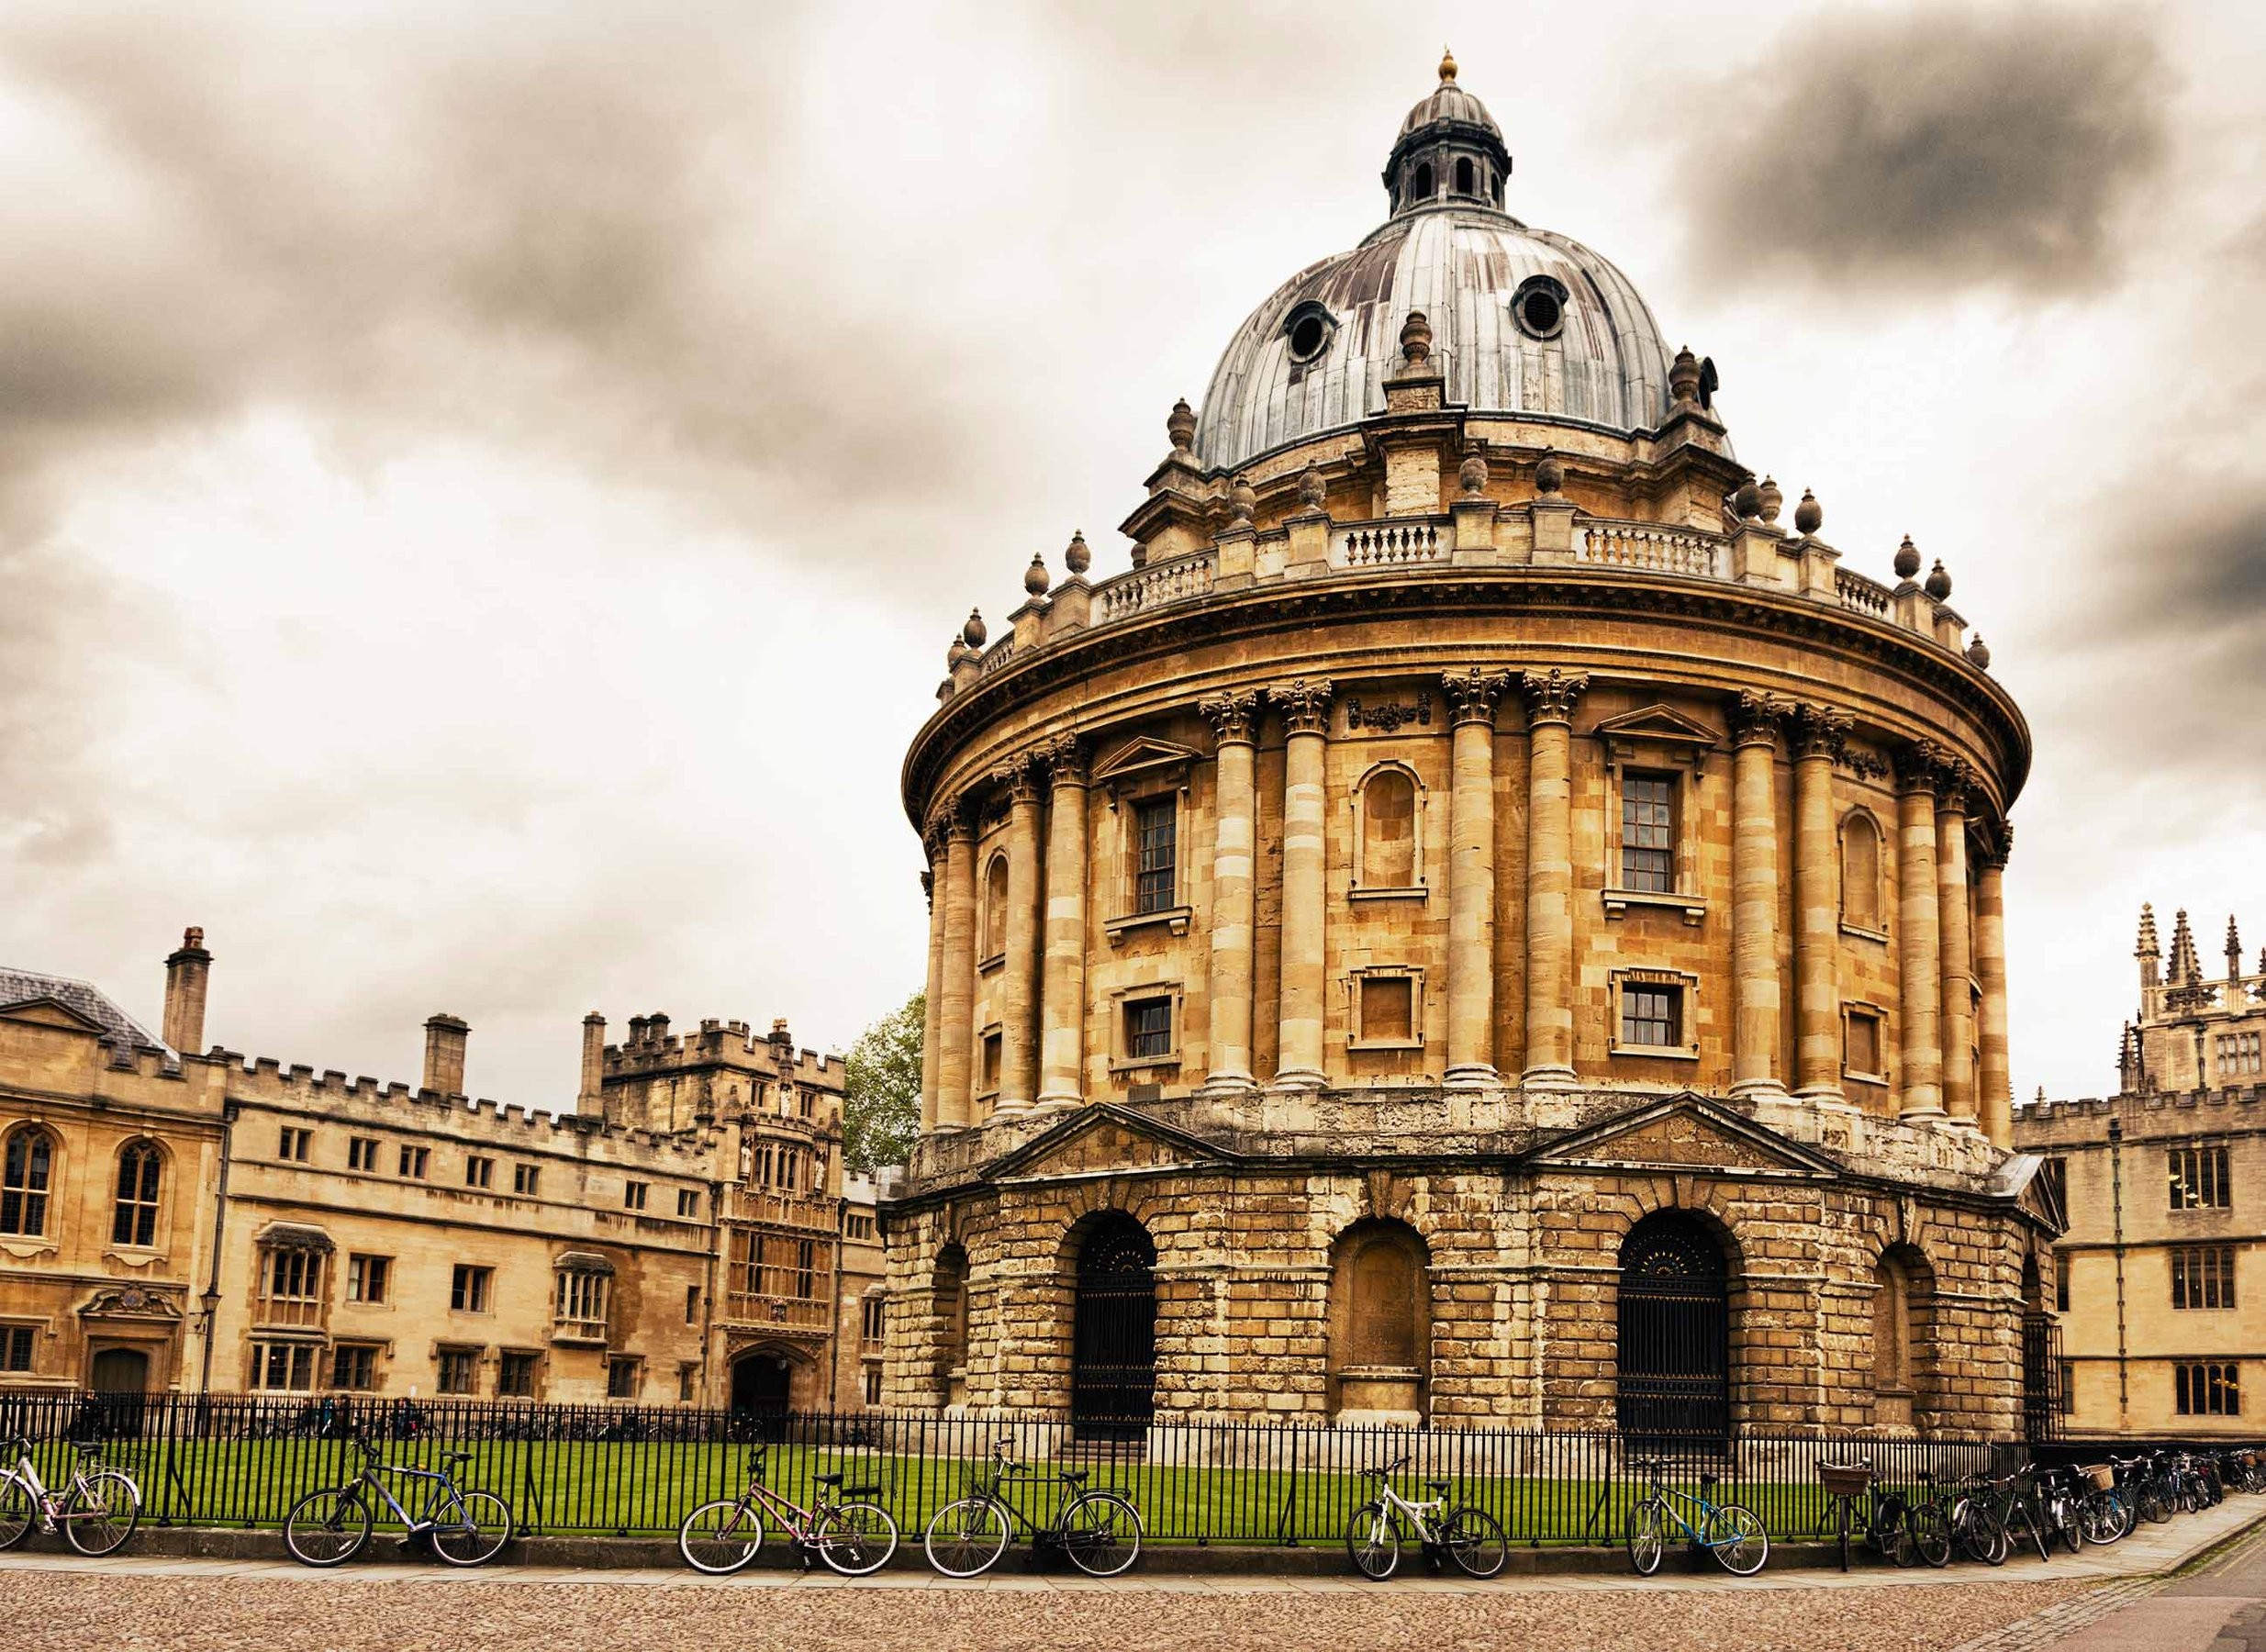 An angled view of the dome in Radcliffe Square at Oxford University on a cloudy day